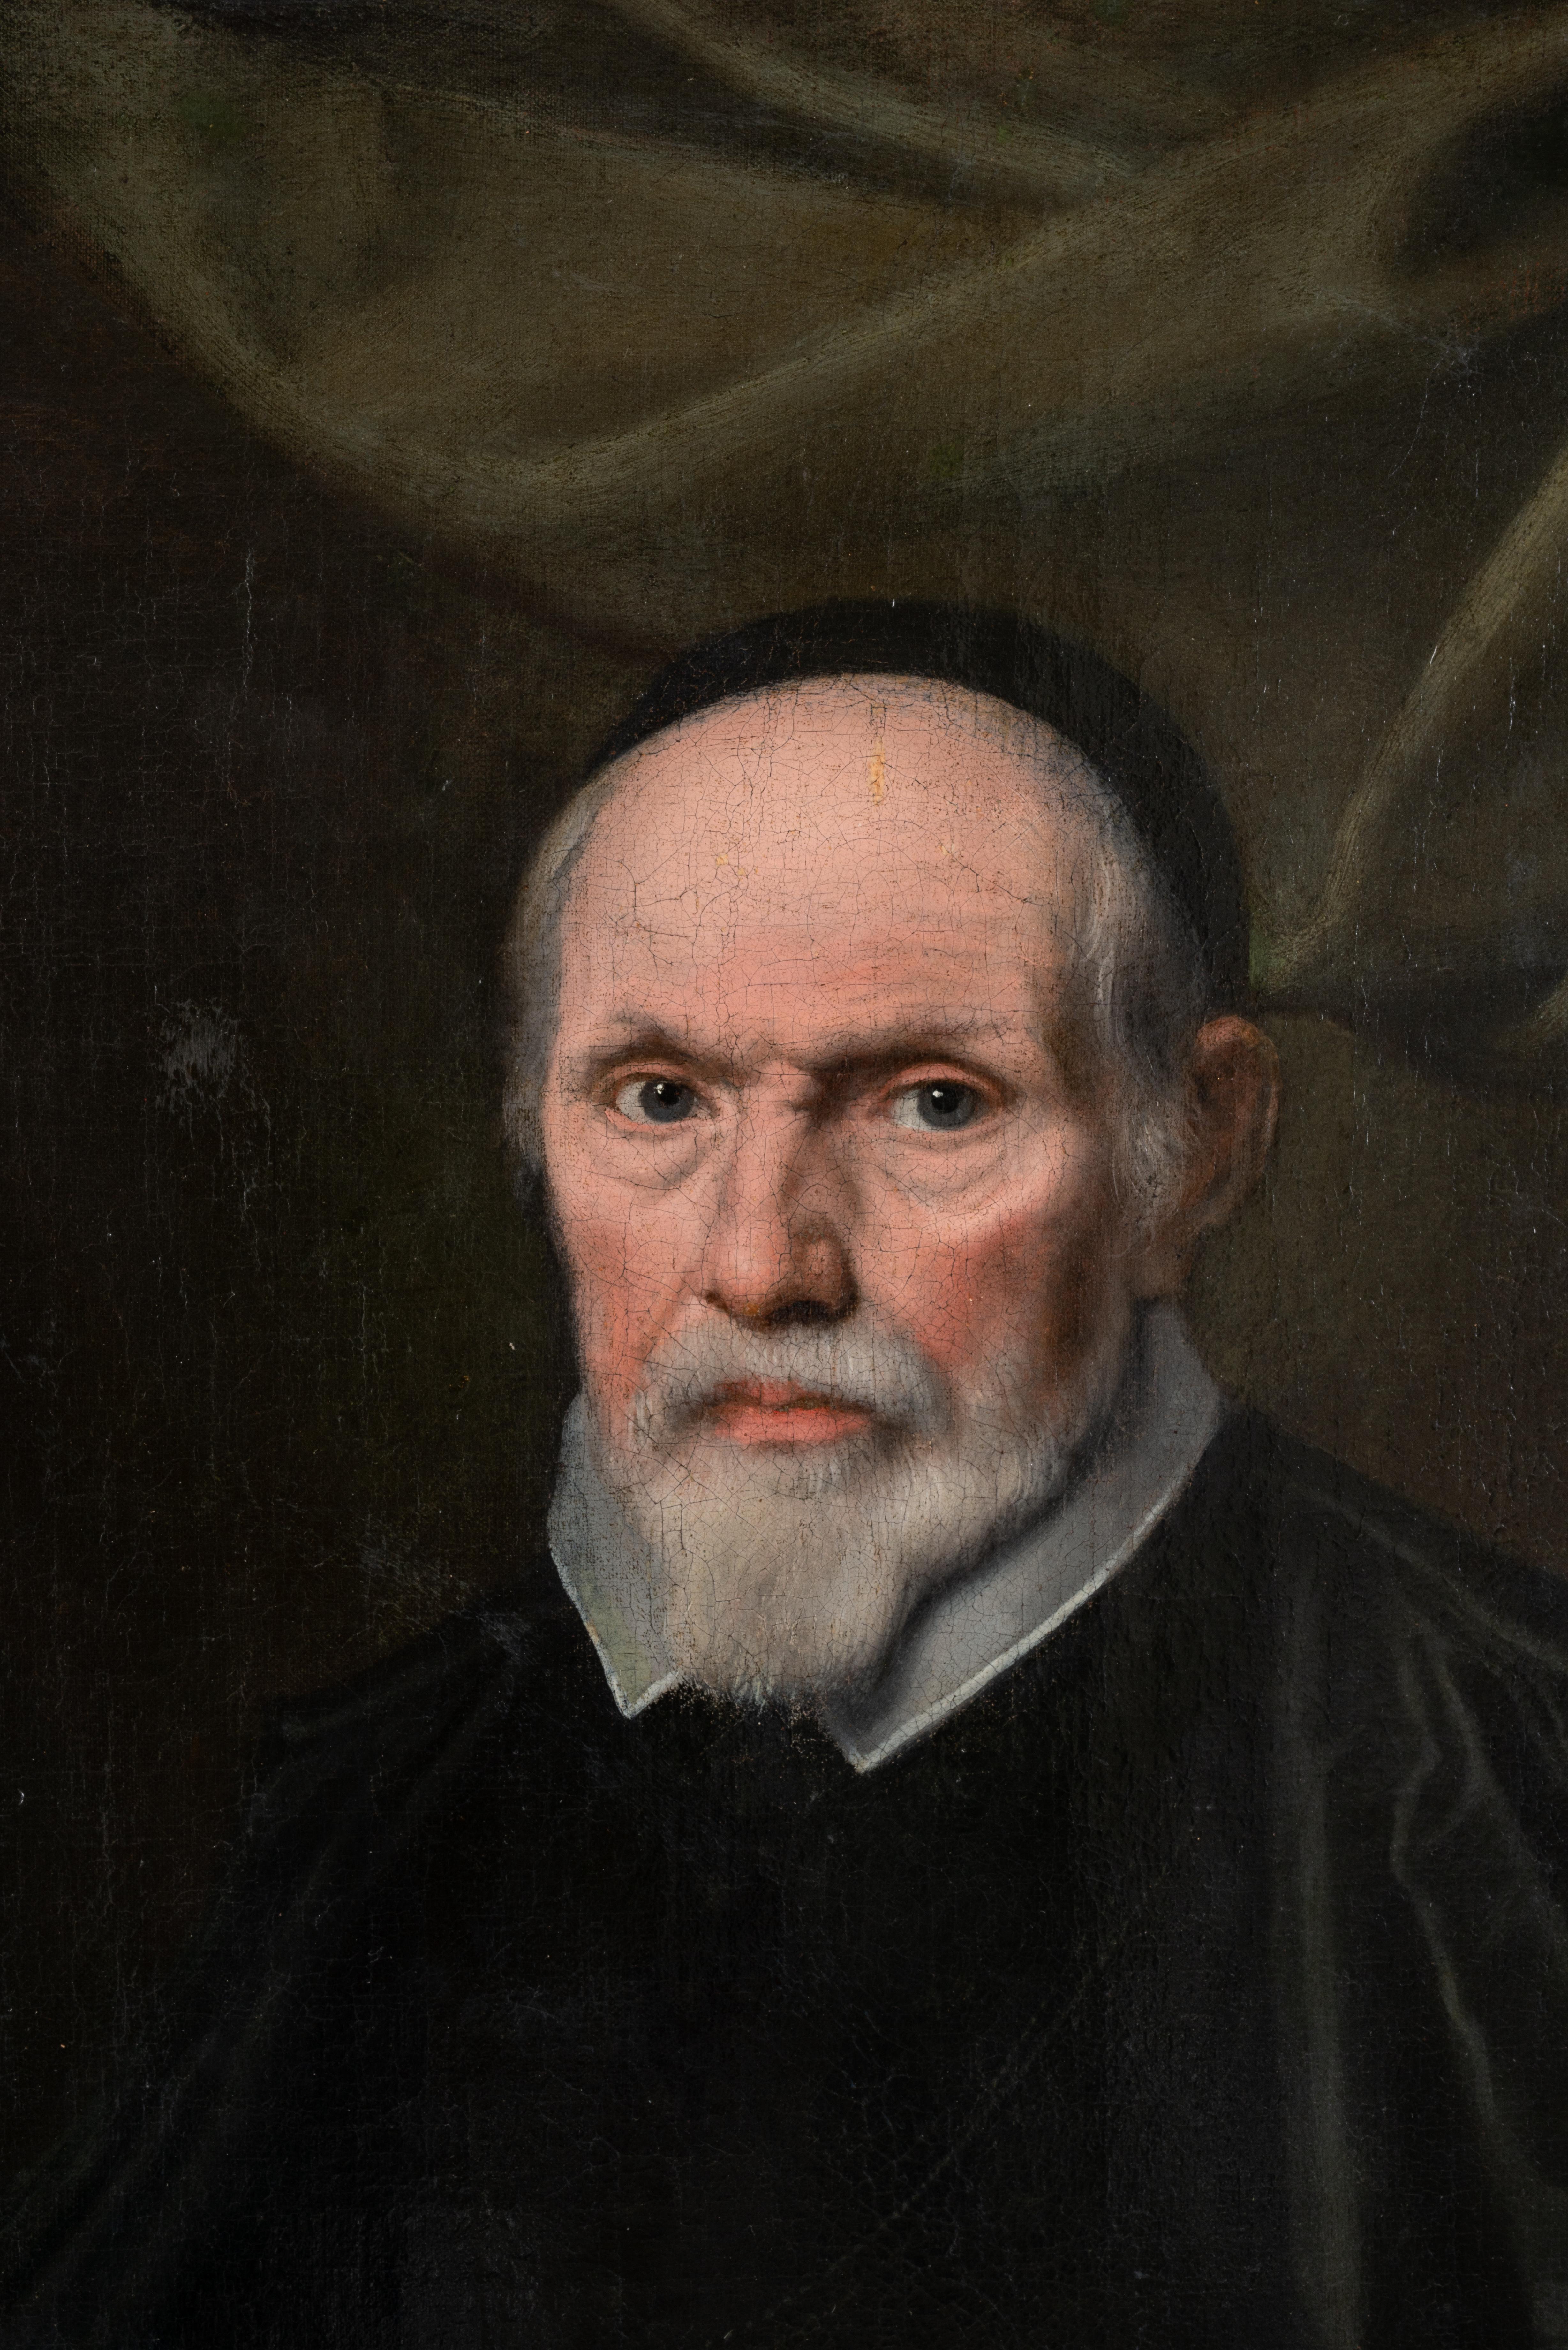 Baroque Large Portrait of a Clergyman, 17th Century French School